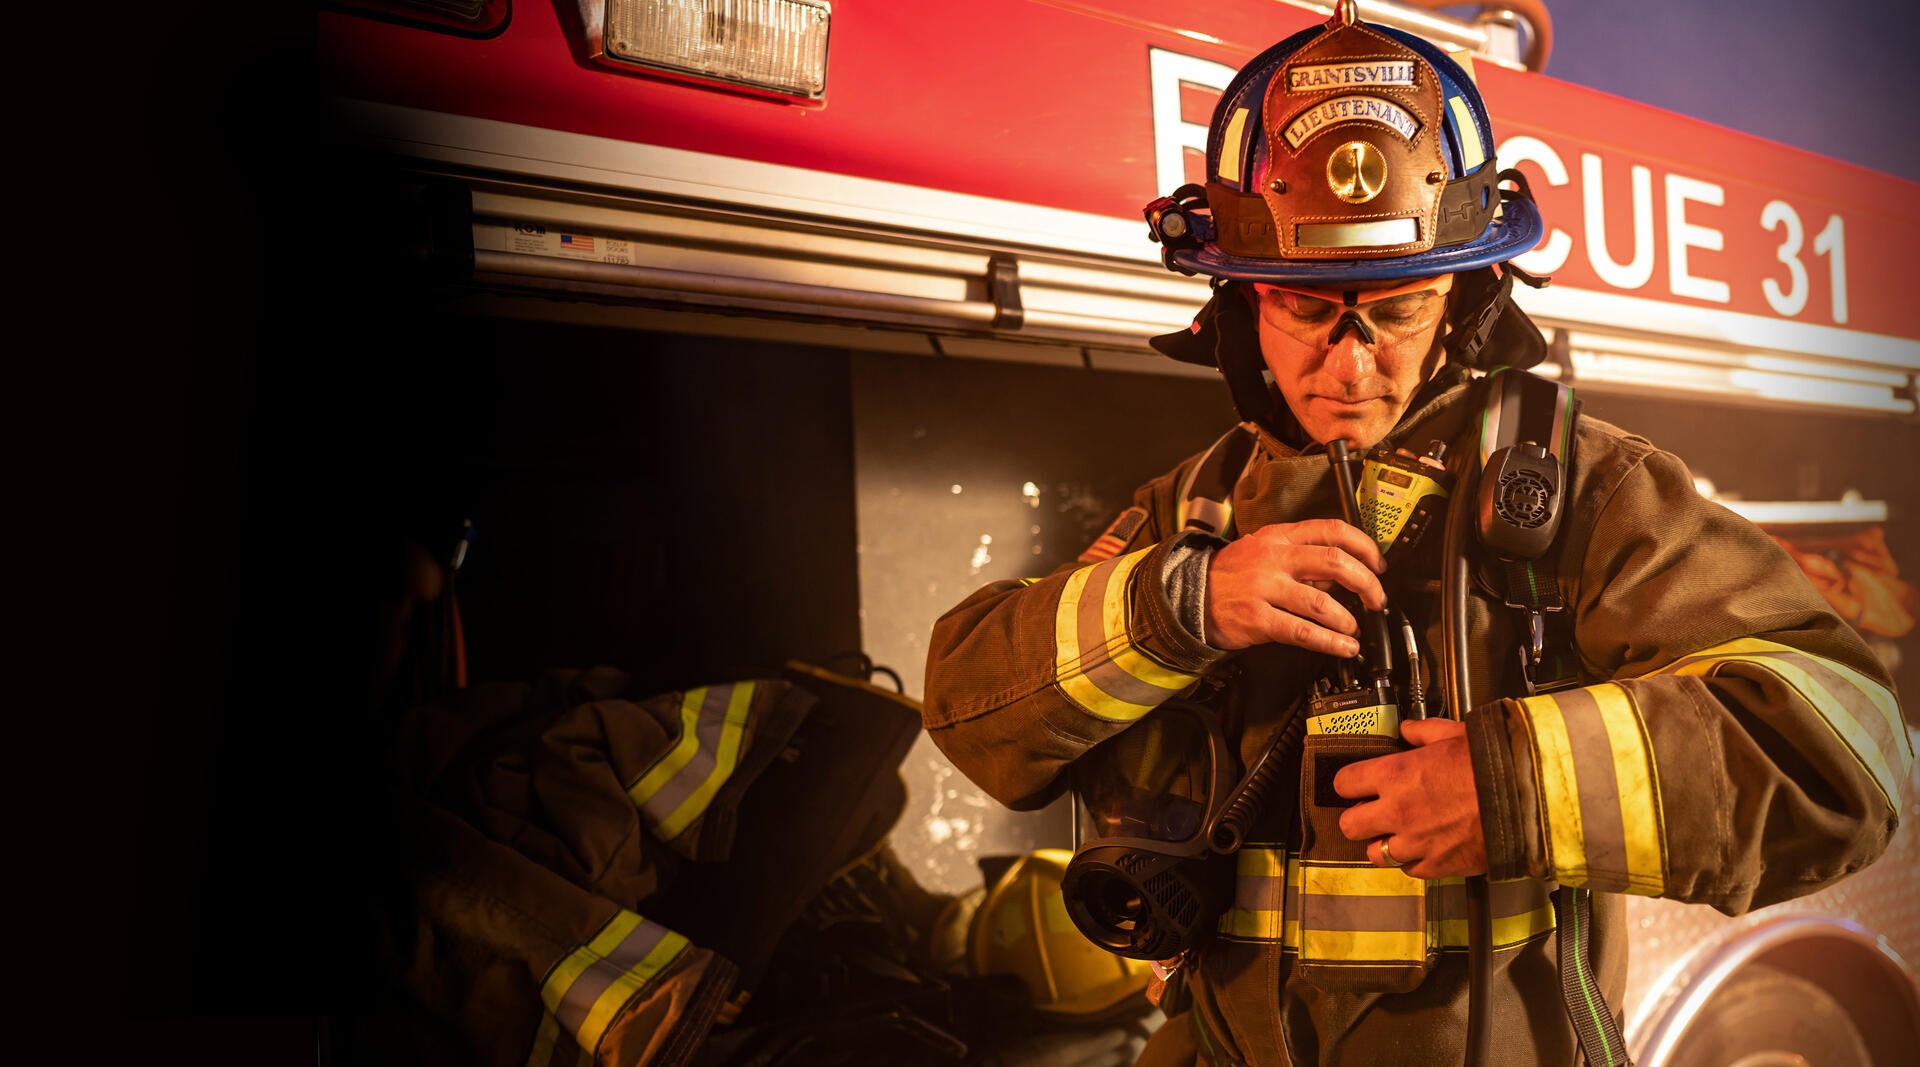 Firefighter with XL Extreme Fire Radio in front of fire truck